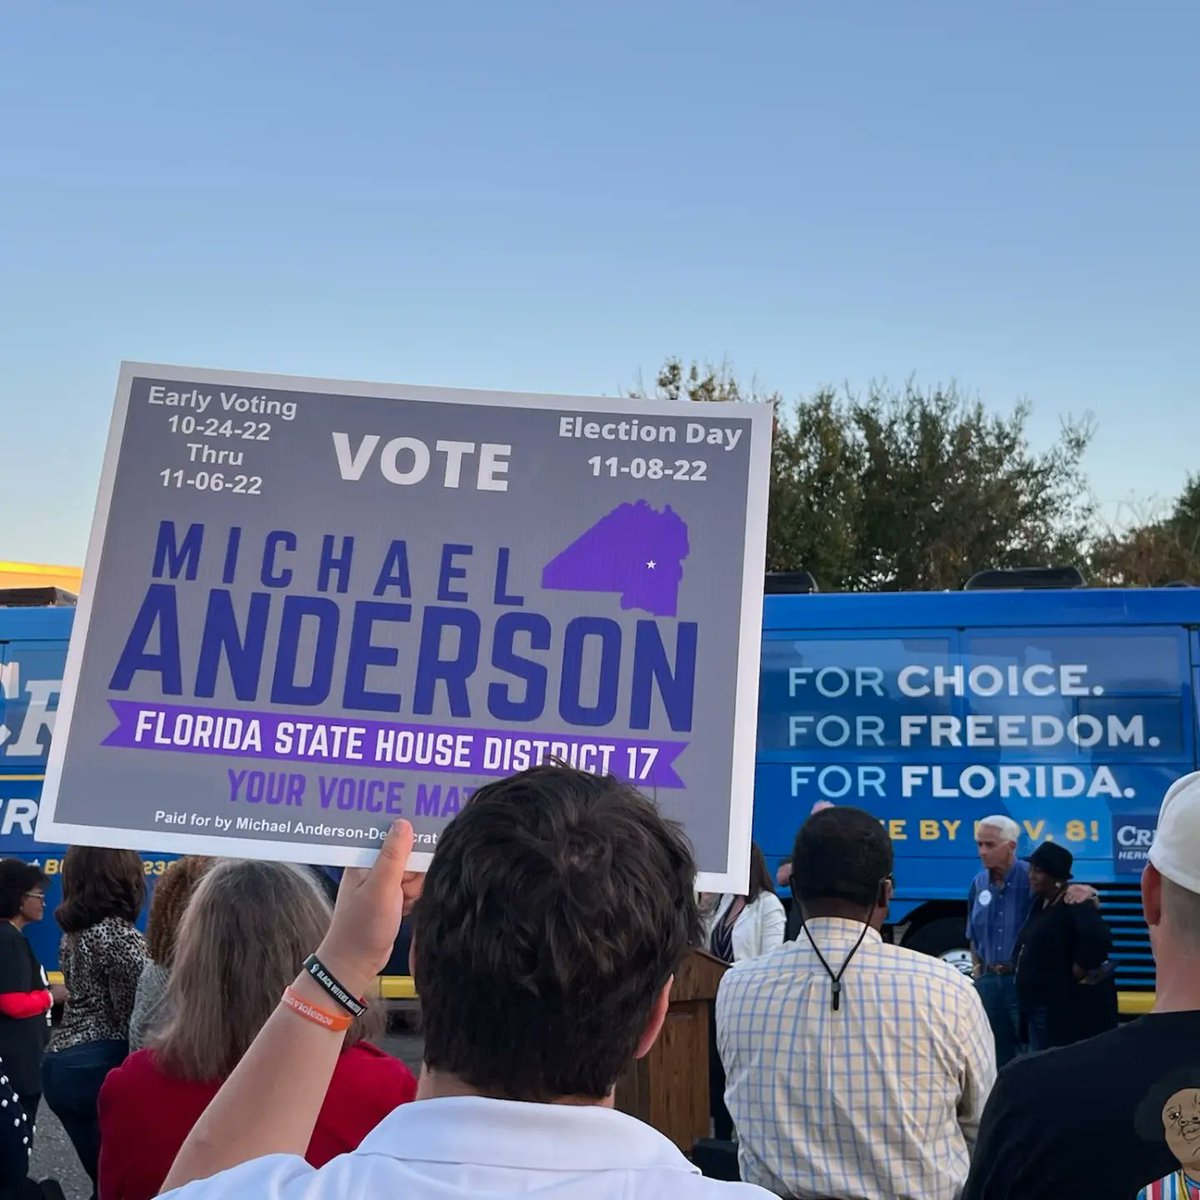 to be clear, my opponent is on track if she wins to be House Speaker by 2028. The right wing Extremist think they have a champion. Let's disrupt the plan by electing me to help be a voice for Equity, Inclusion, and Justice in Tallahassee. The choice is clear.